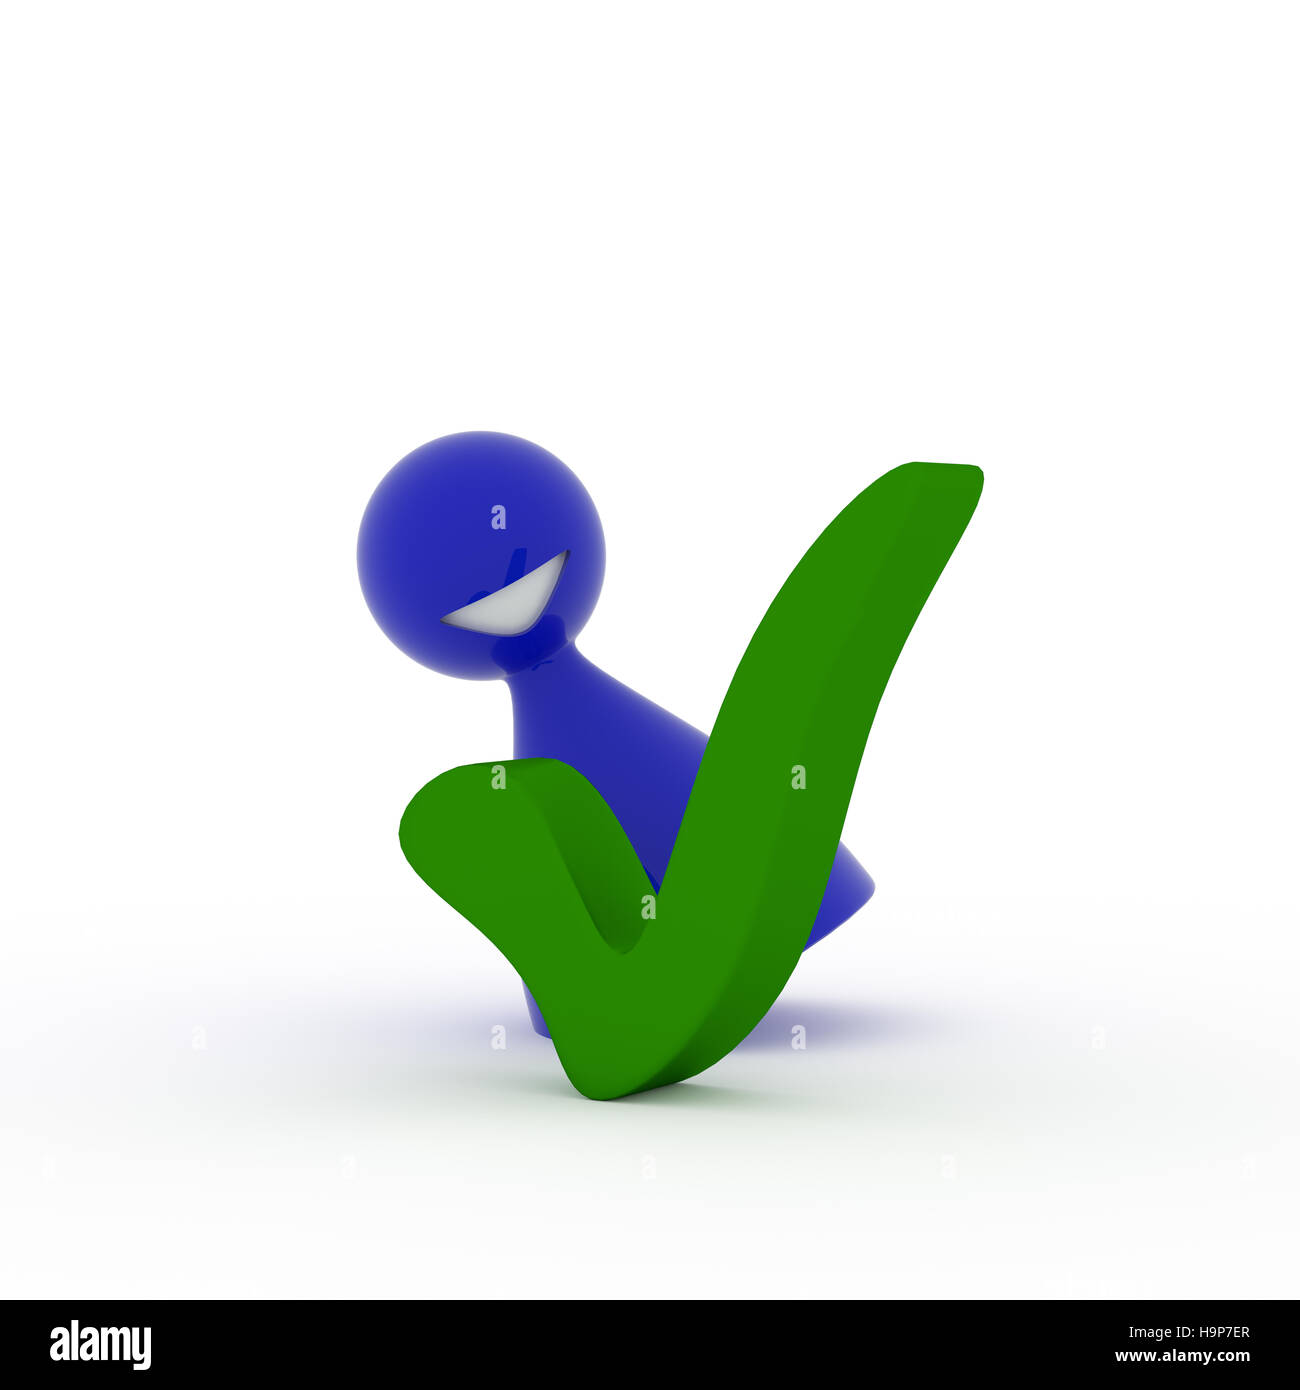 Blue character with a green check mark, 3d rendering Stock Photo